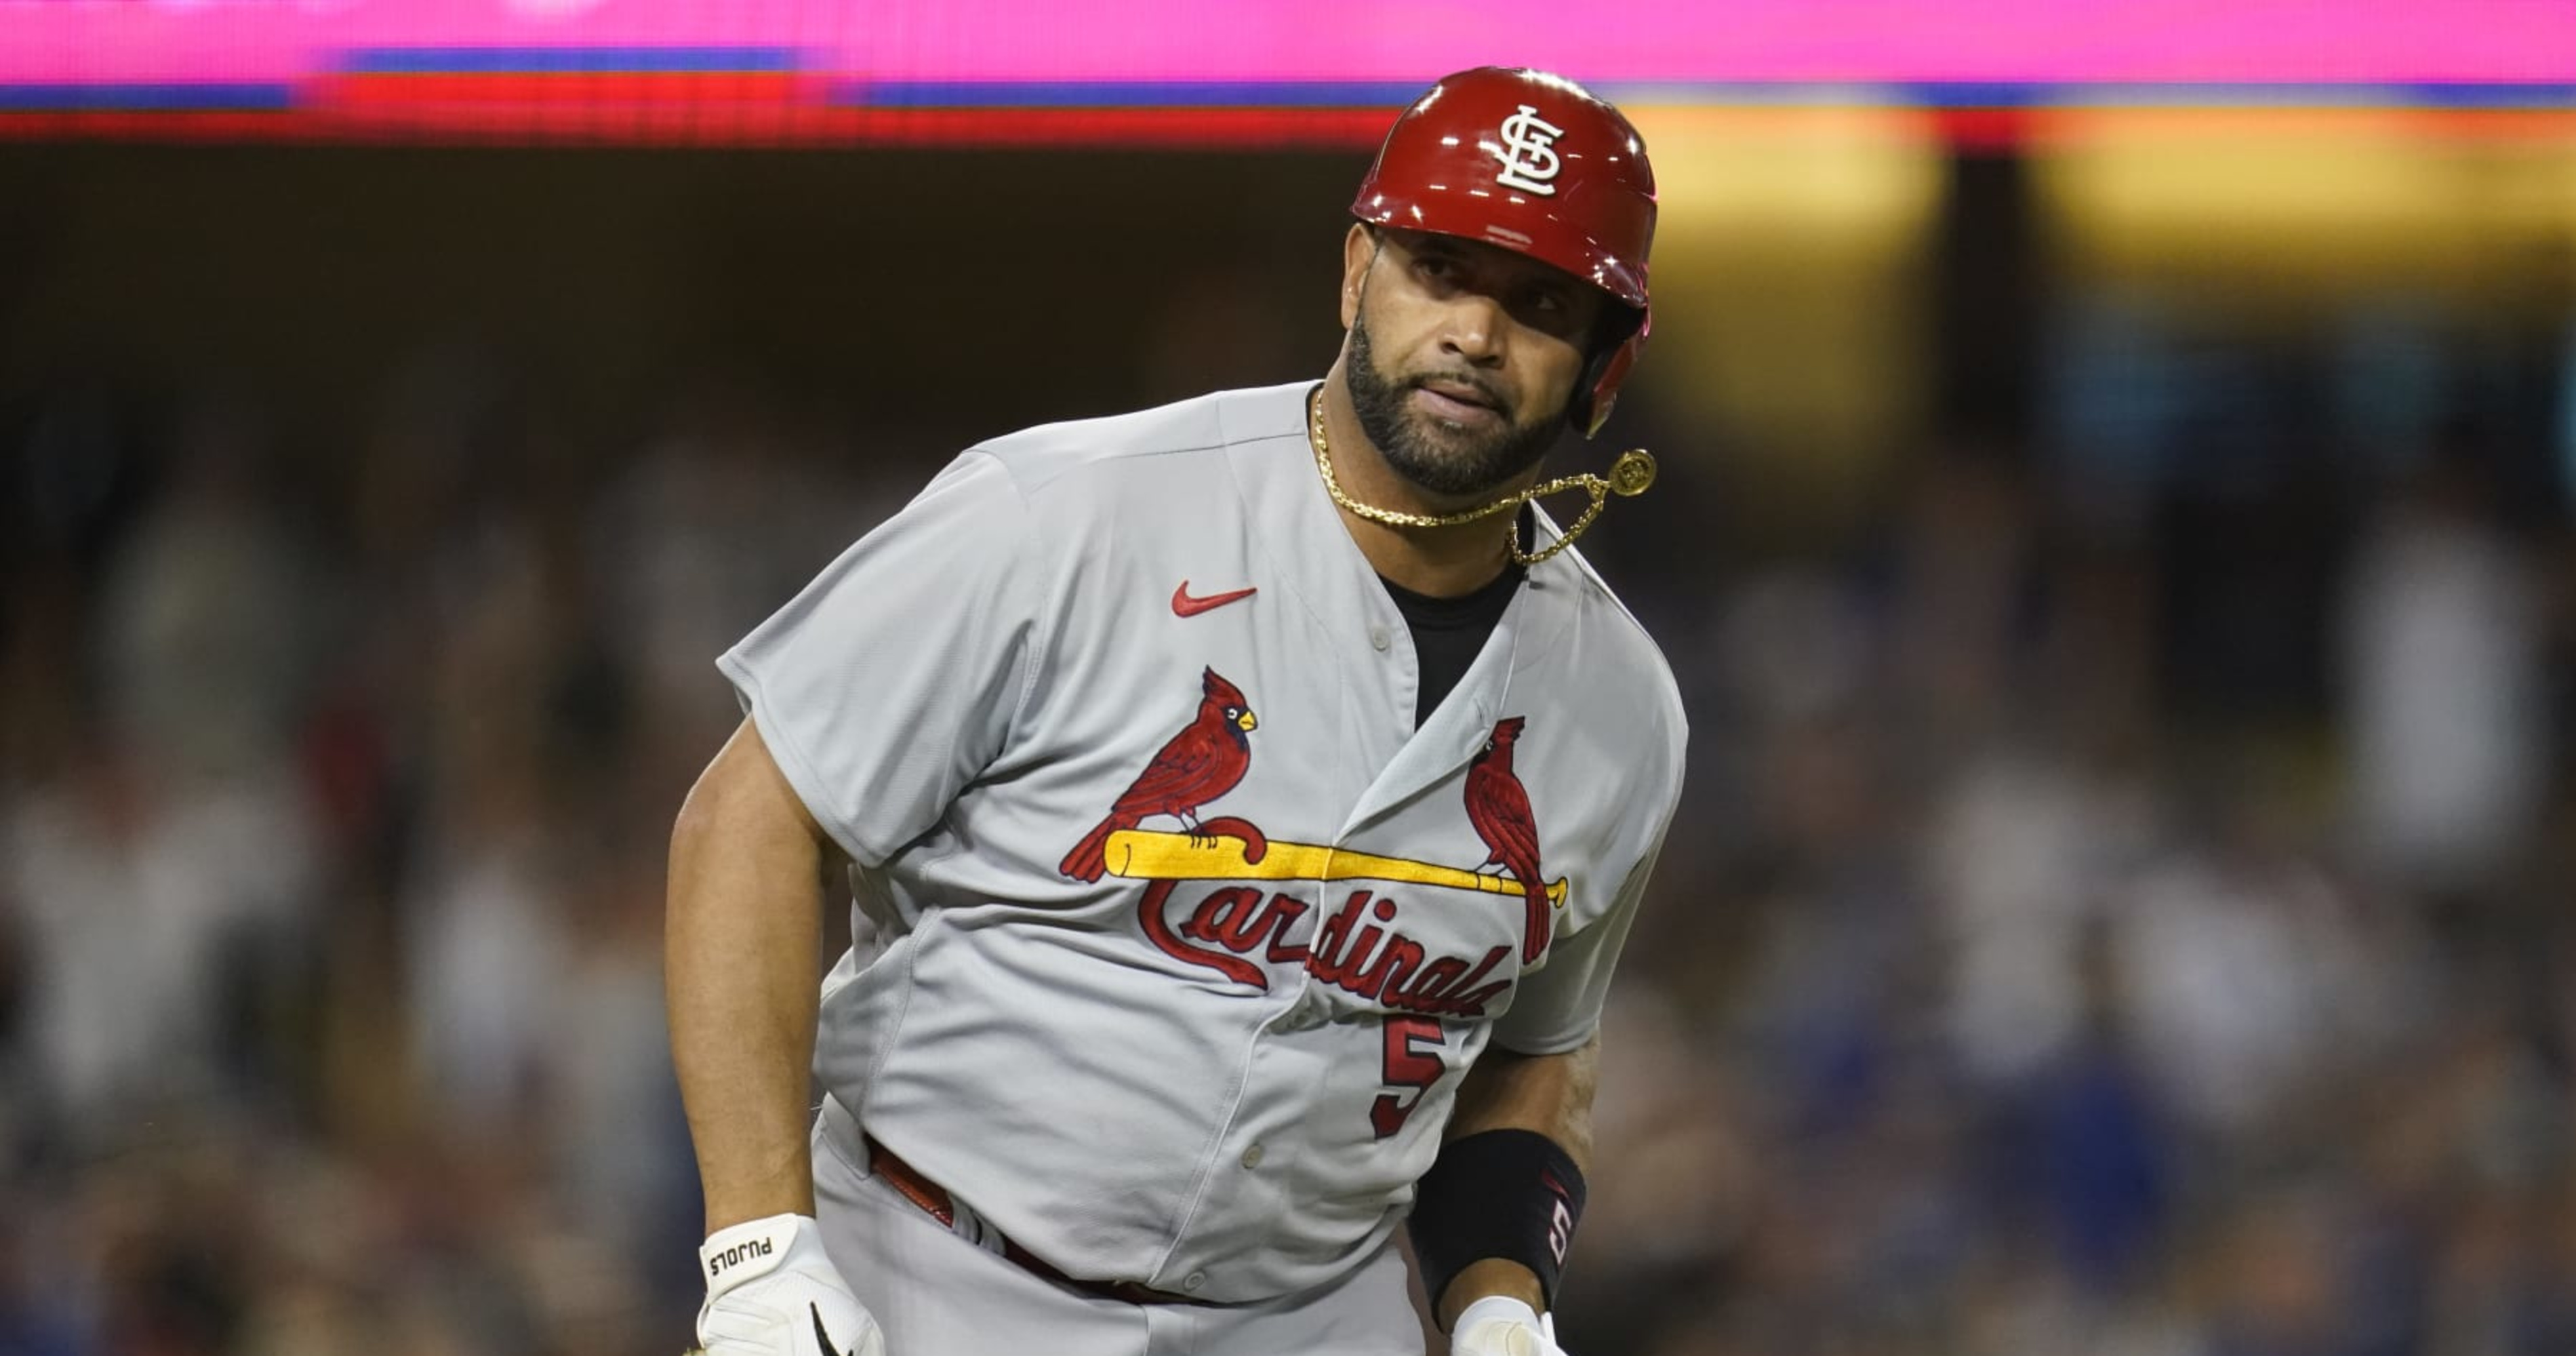 Albert Pujols Hits Career HR No. 700; Becomes 4th MLB Player to Achieve Feat - Bleacher Report